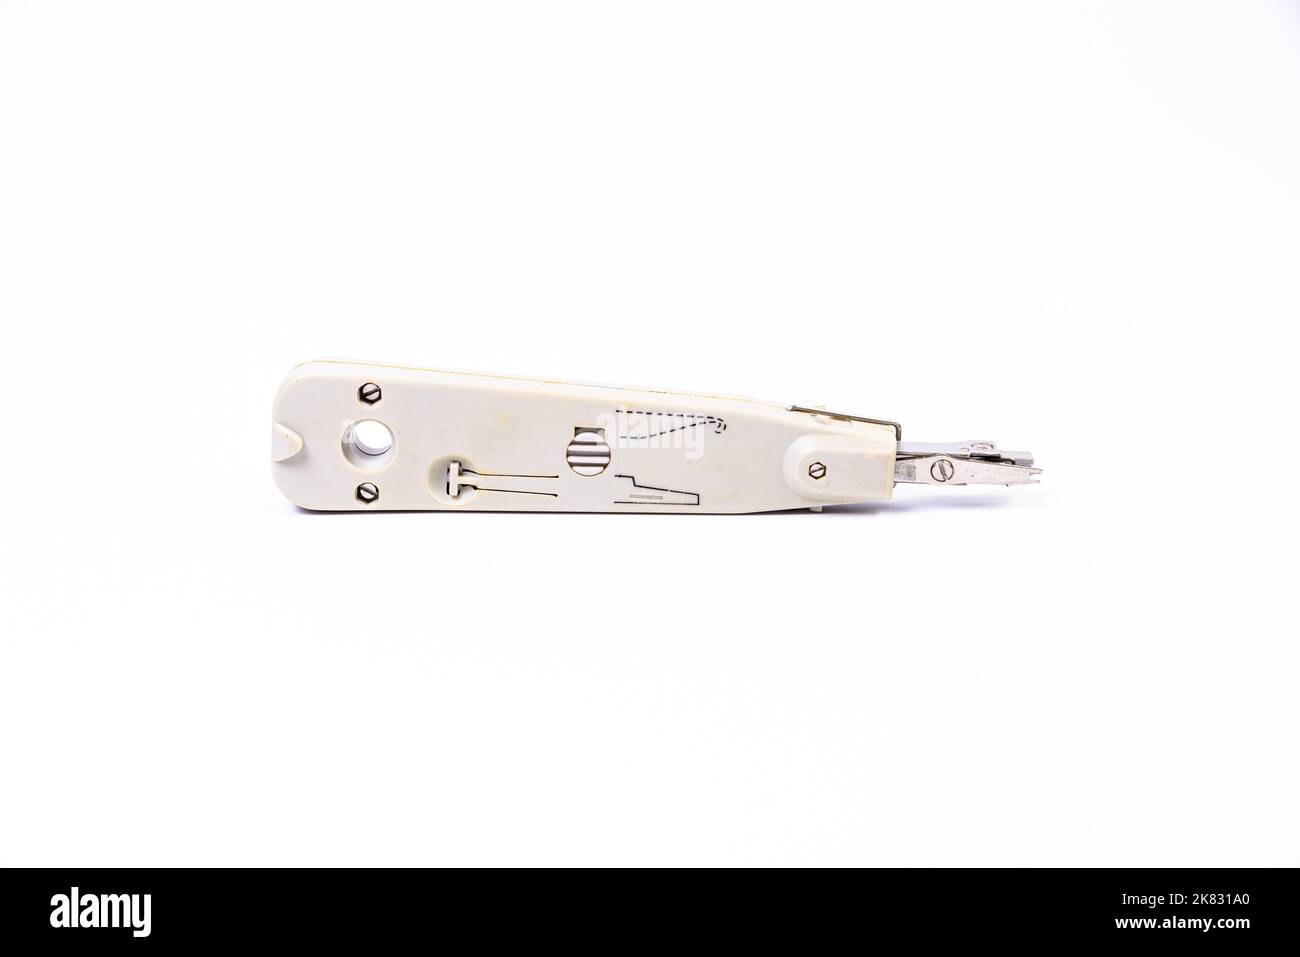 Hand crimp tool for crimping of the round terminals and small heap of blue insulated terminals on a white background Stock Photo